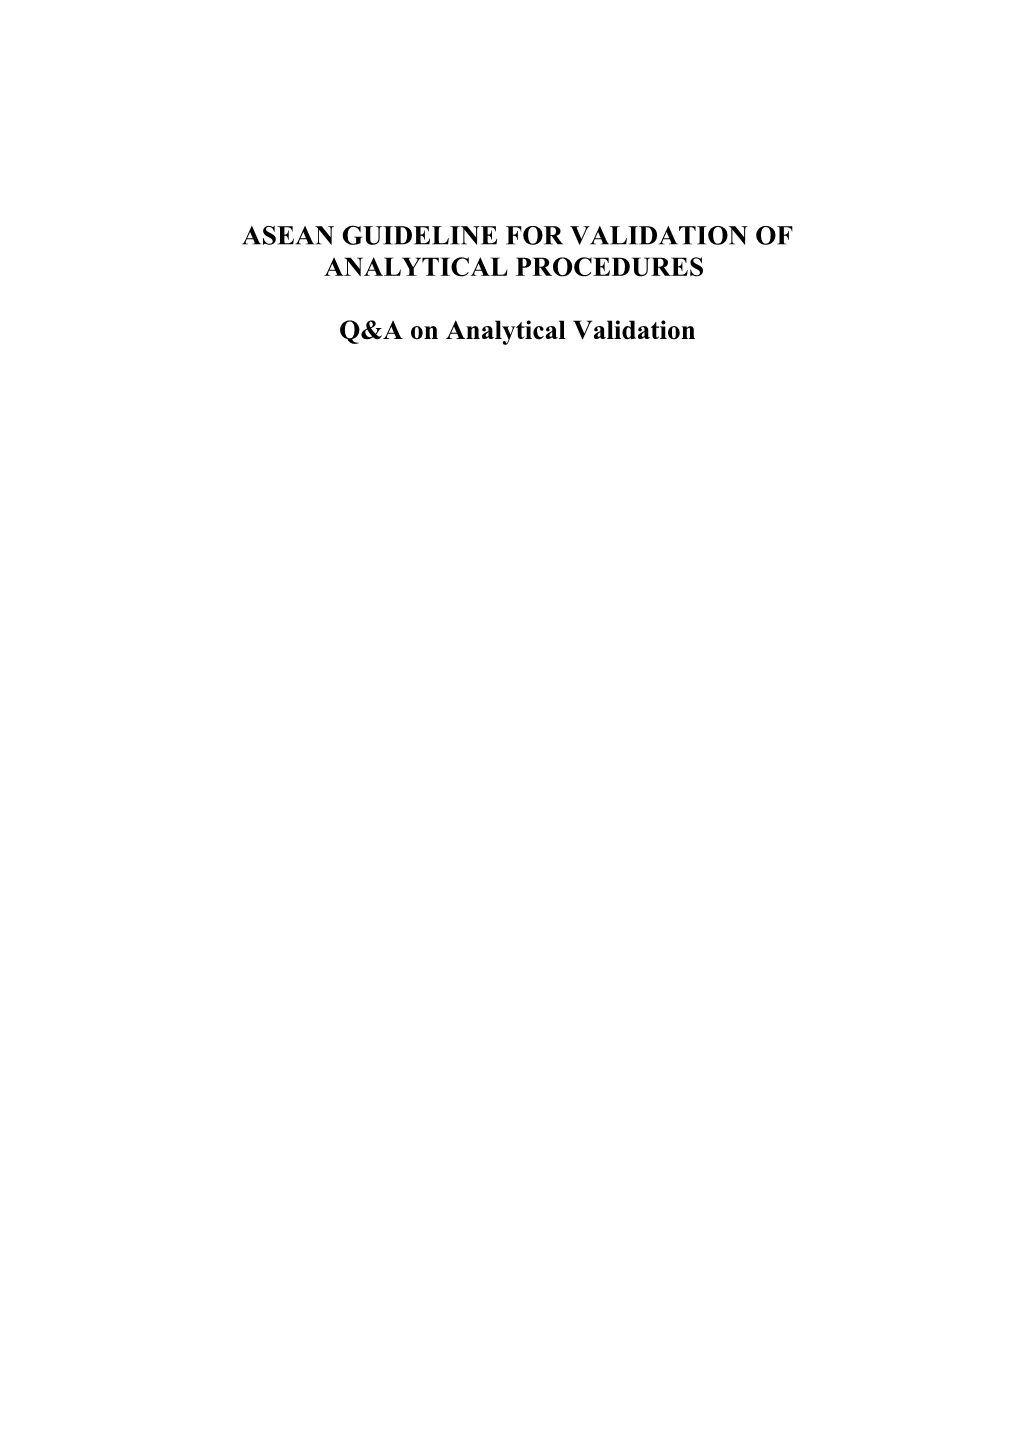 Asean Guideline for Validation of Analytical Procedures